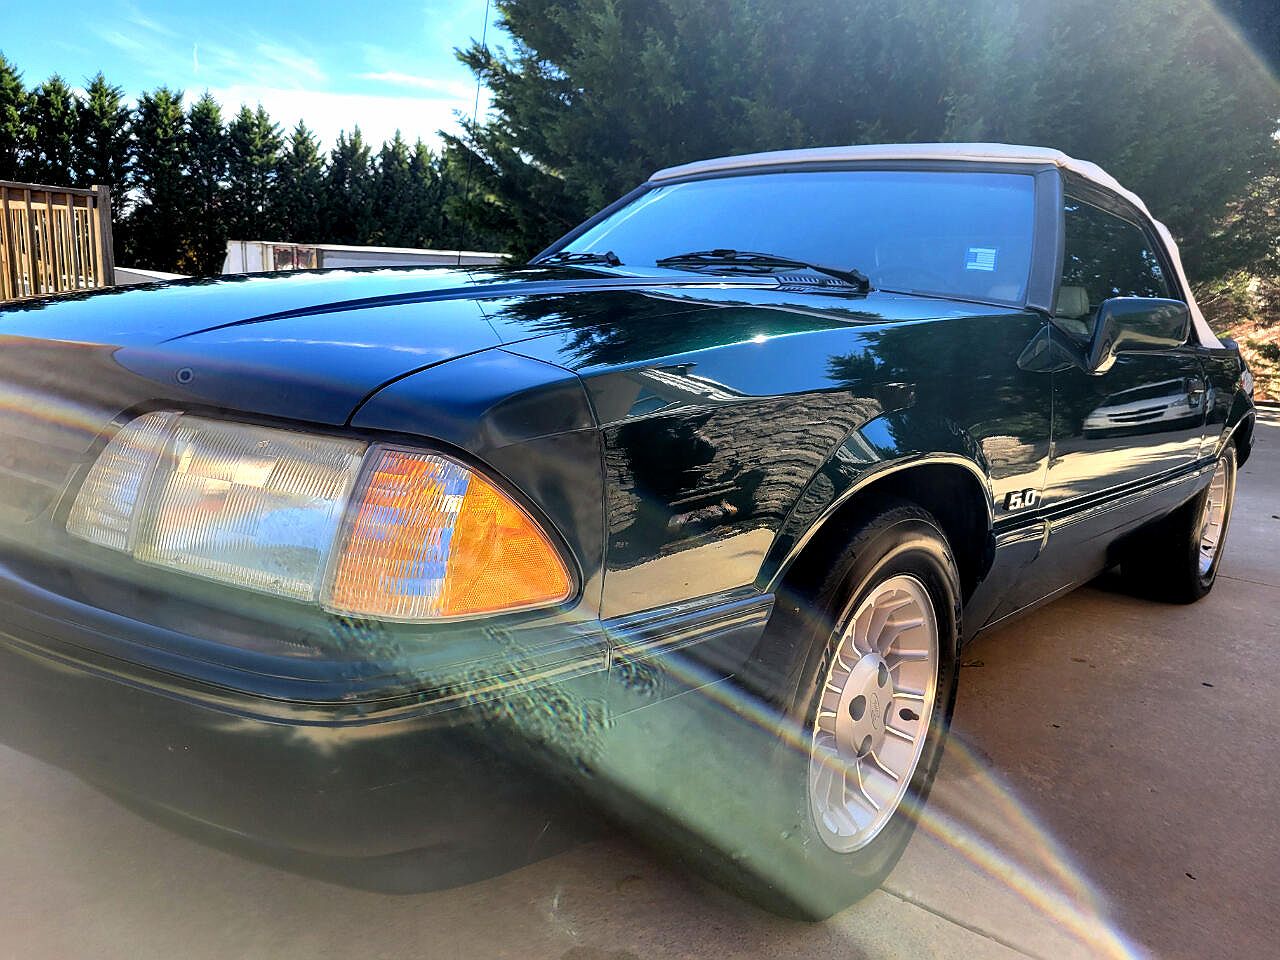 1990 Ford Mustang LX image 53